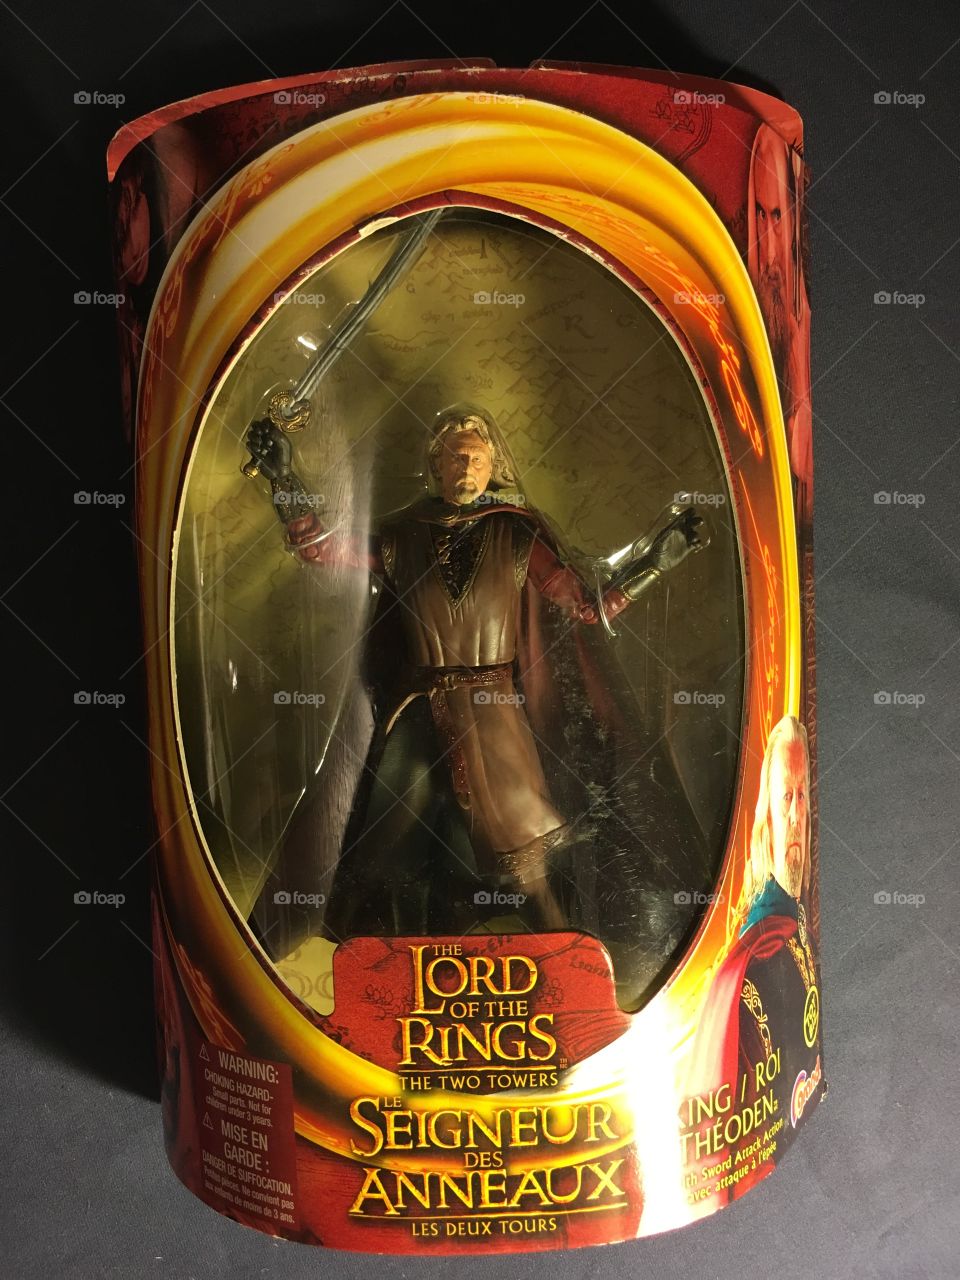 King Theoden - The lord of the Rings - The Two Towers 
Action figure 
Released - 2002